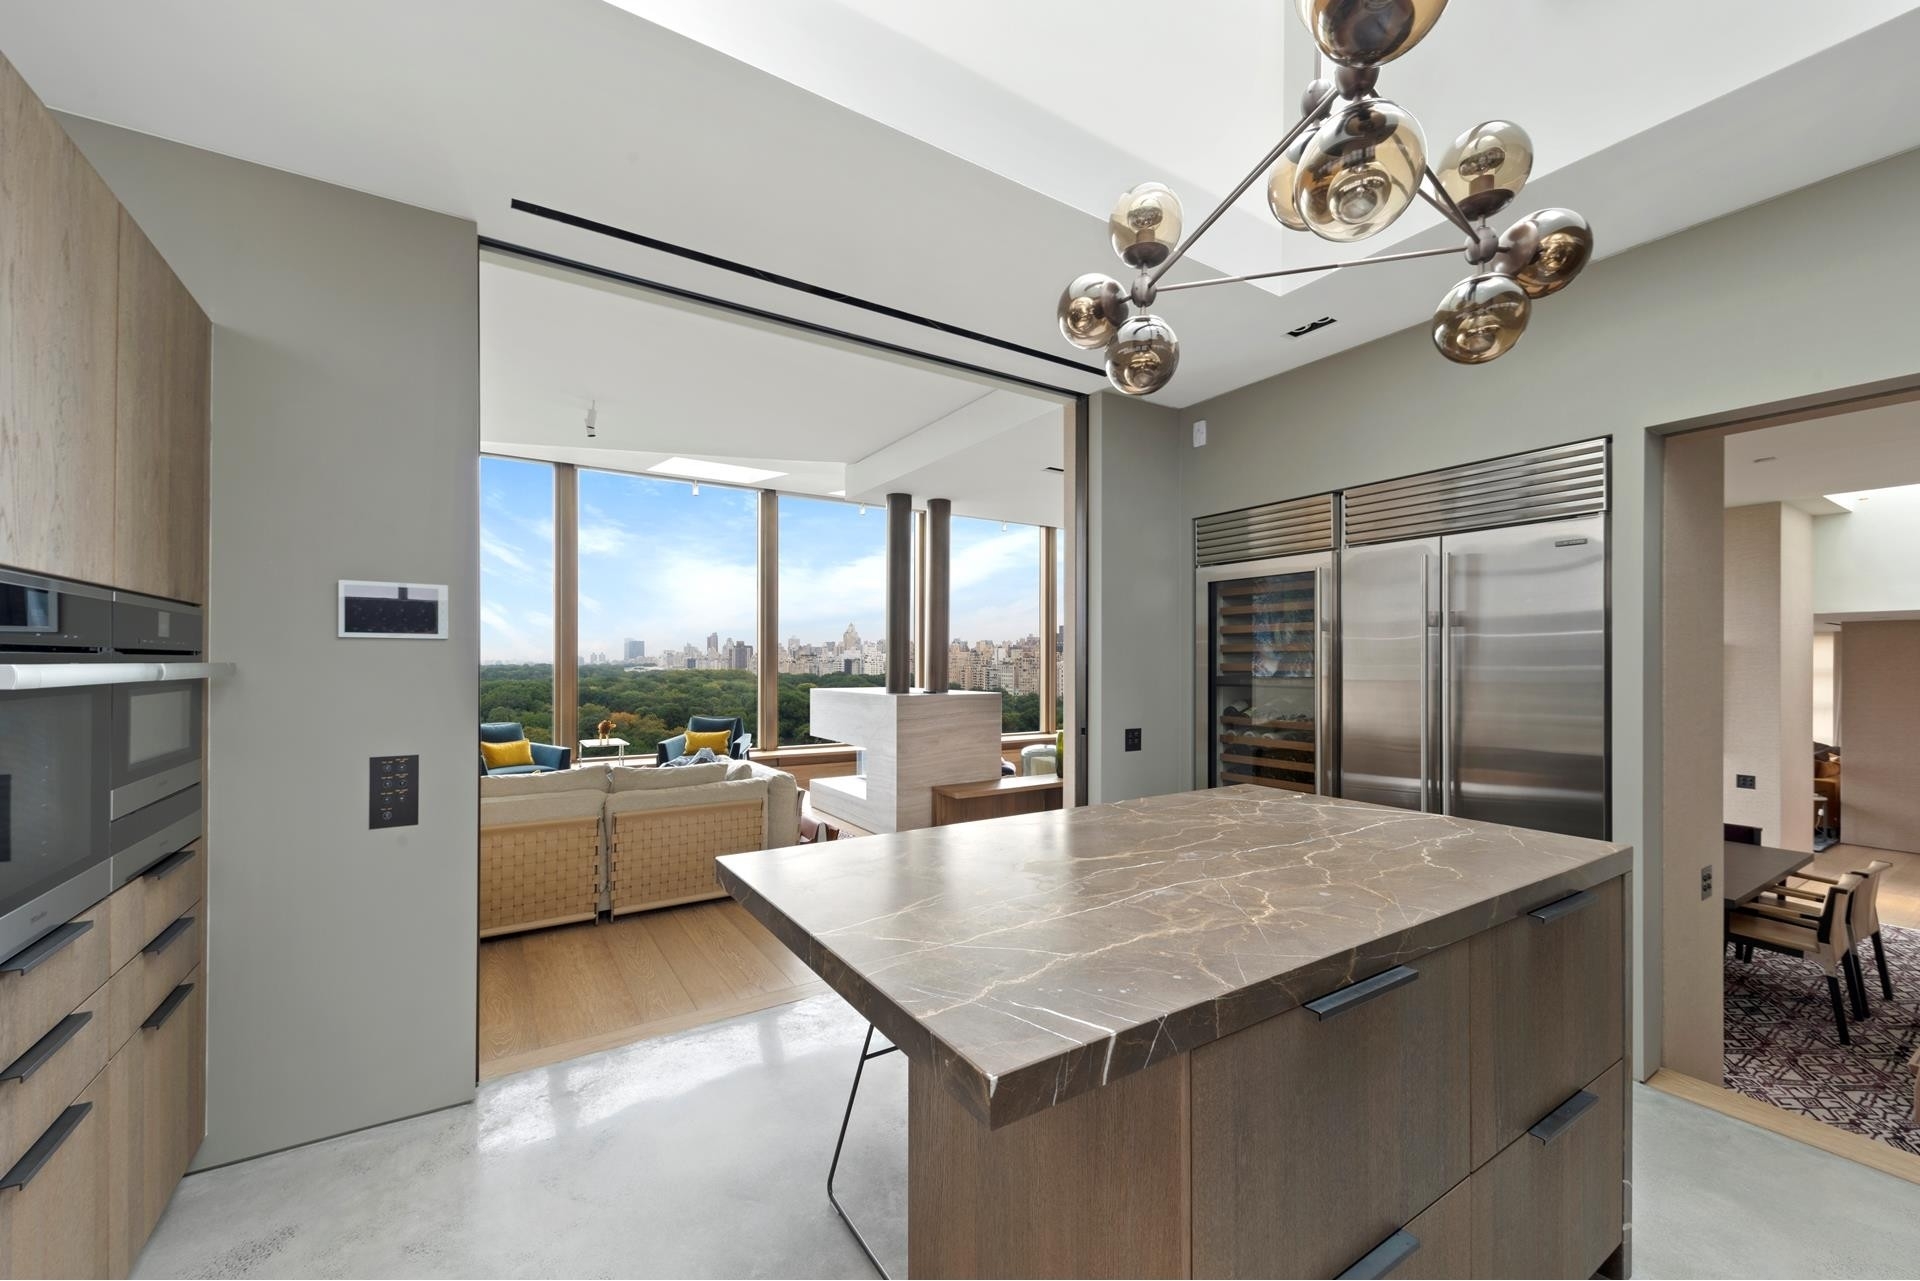 21. Co-op Properties for Sale at 128 CENTRAL PARK S, PH/15A Central Park South, New York, NY 10019